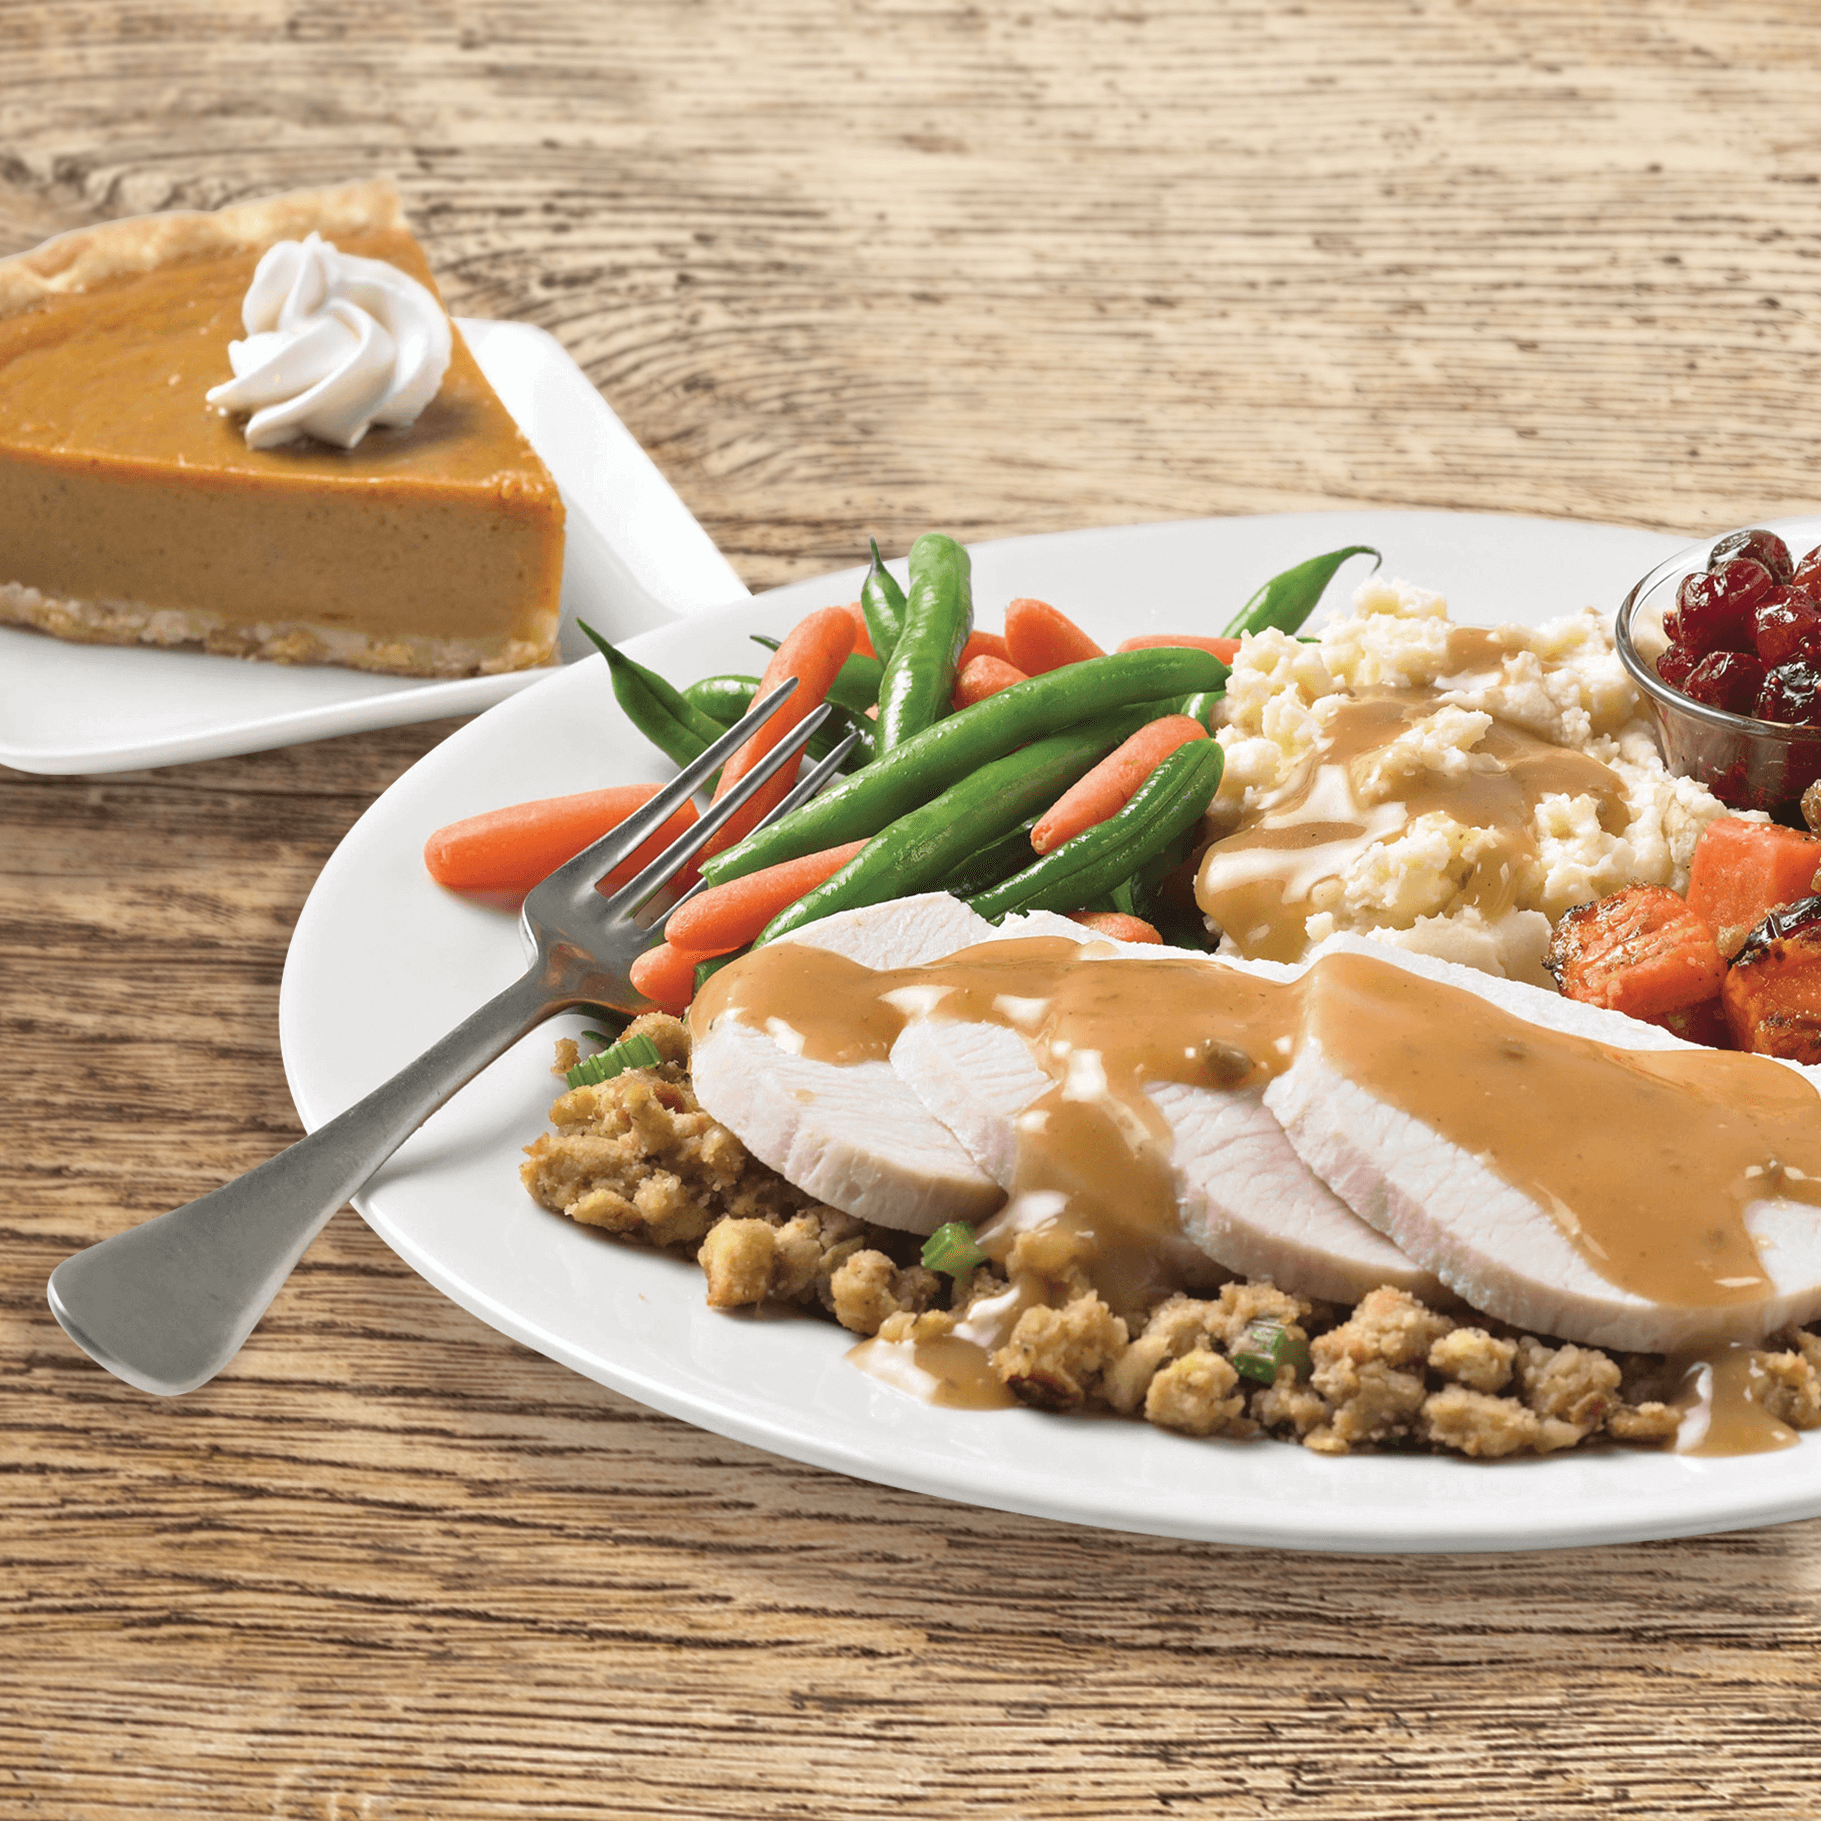 Thanksgiving Dinner for dine-in or takeout.